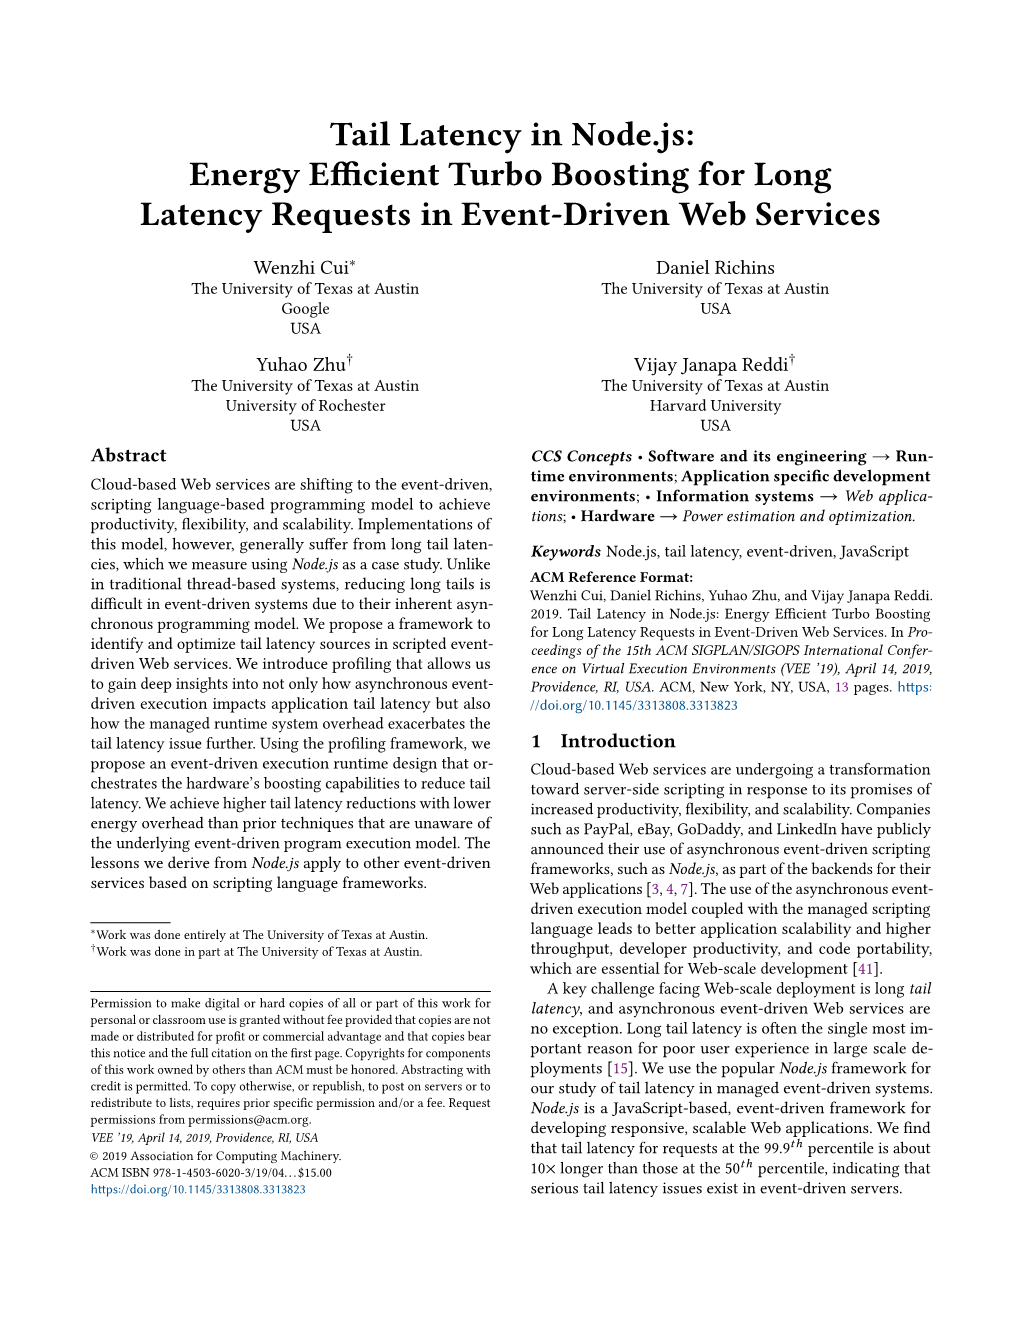 Tail Latency in Node.Js: Energy Efficient Turbo Boosting for Long Latency Requests in Event-Driven Web Services